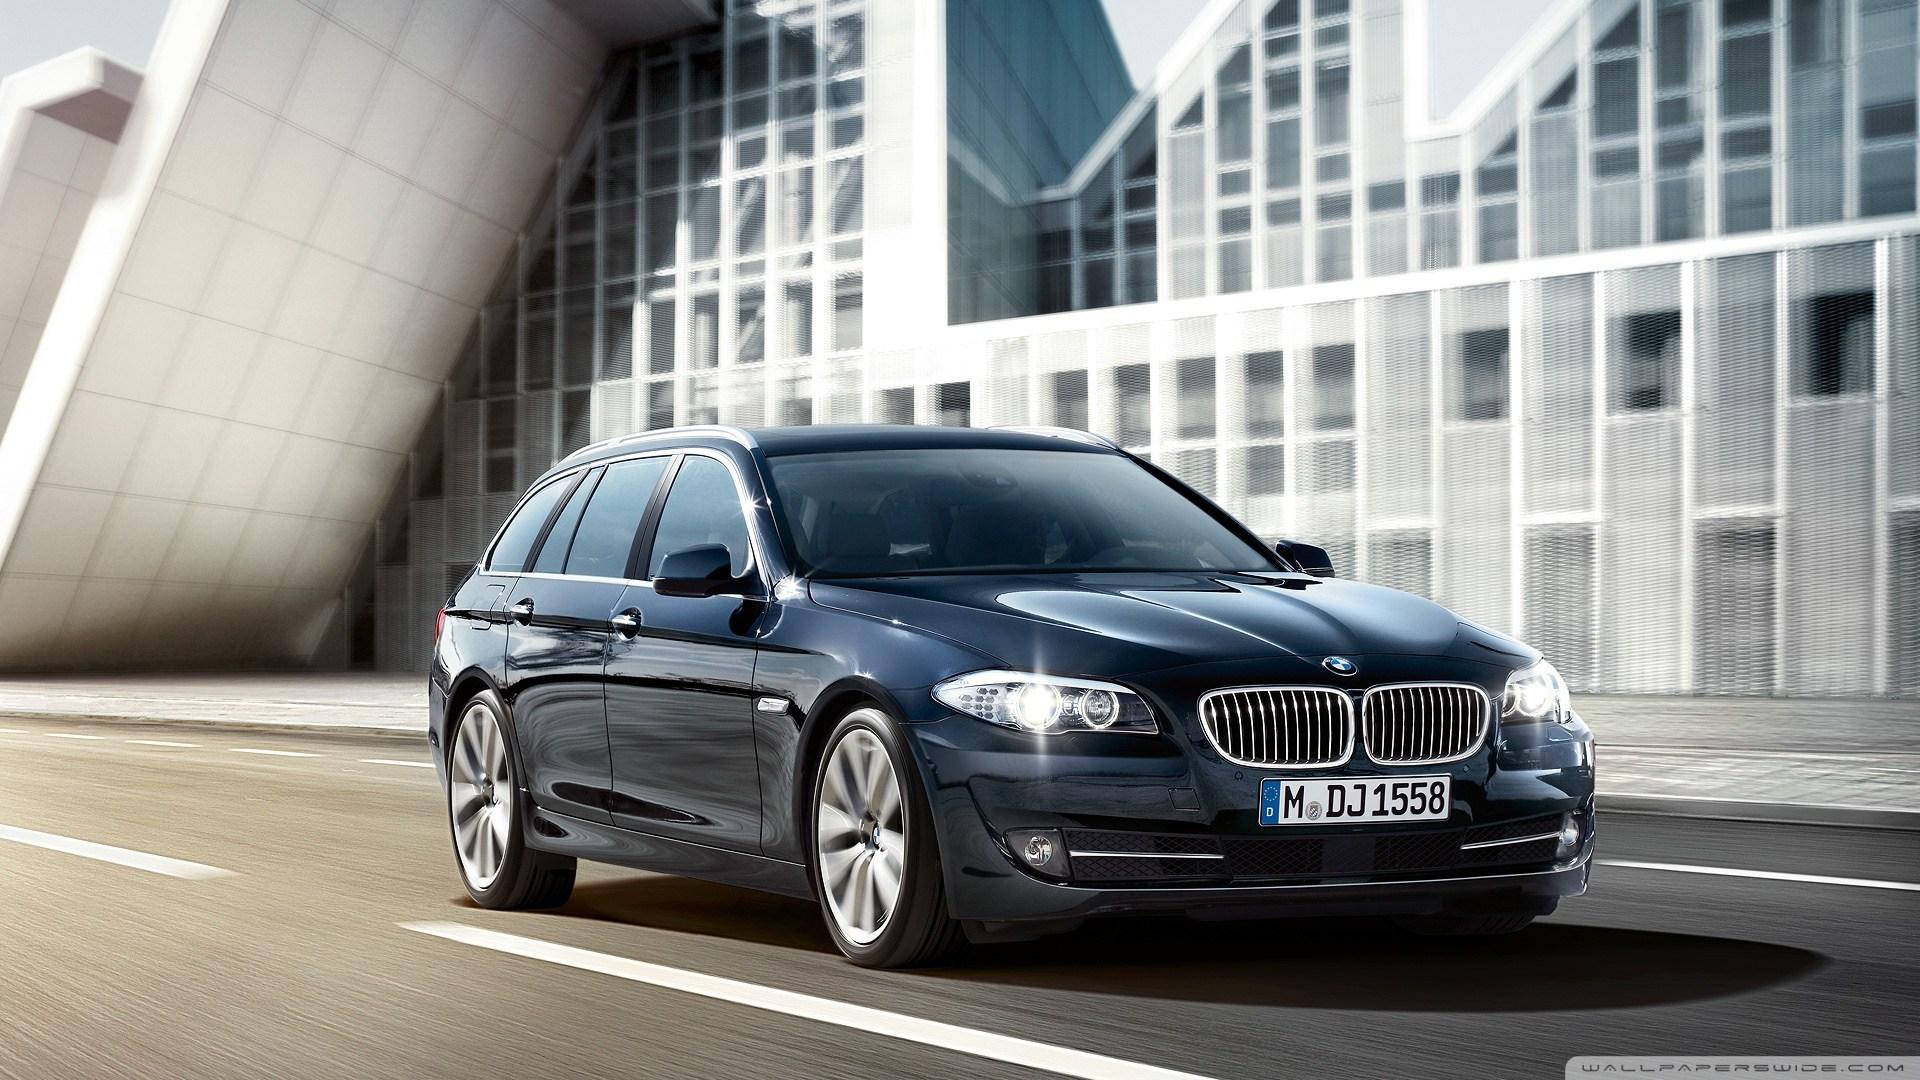 Wallpaper Blink Best Of Bmw 5 Series Wallpaper HD For Android